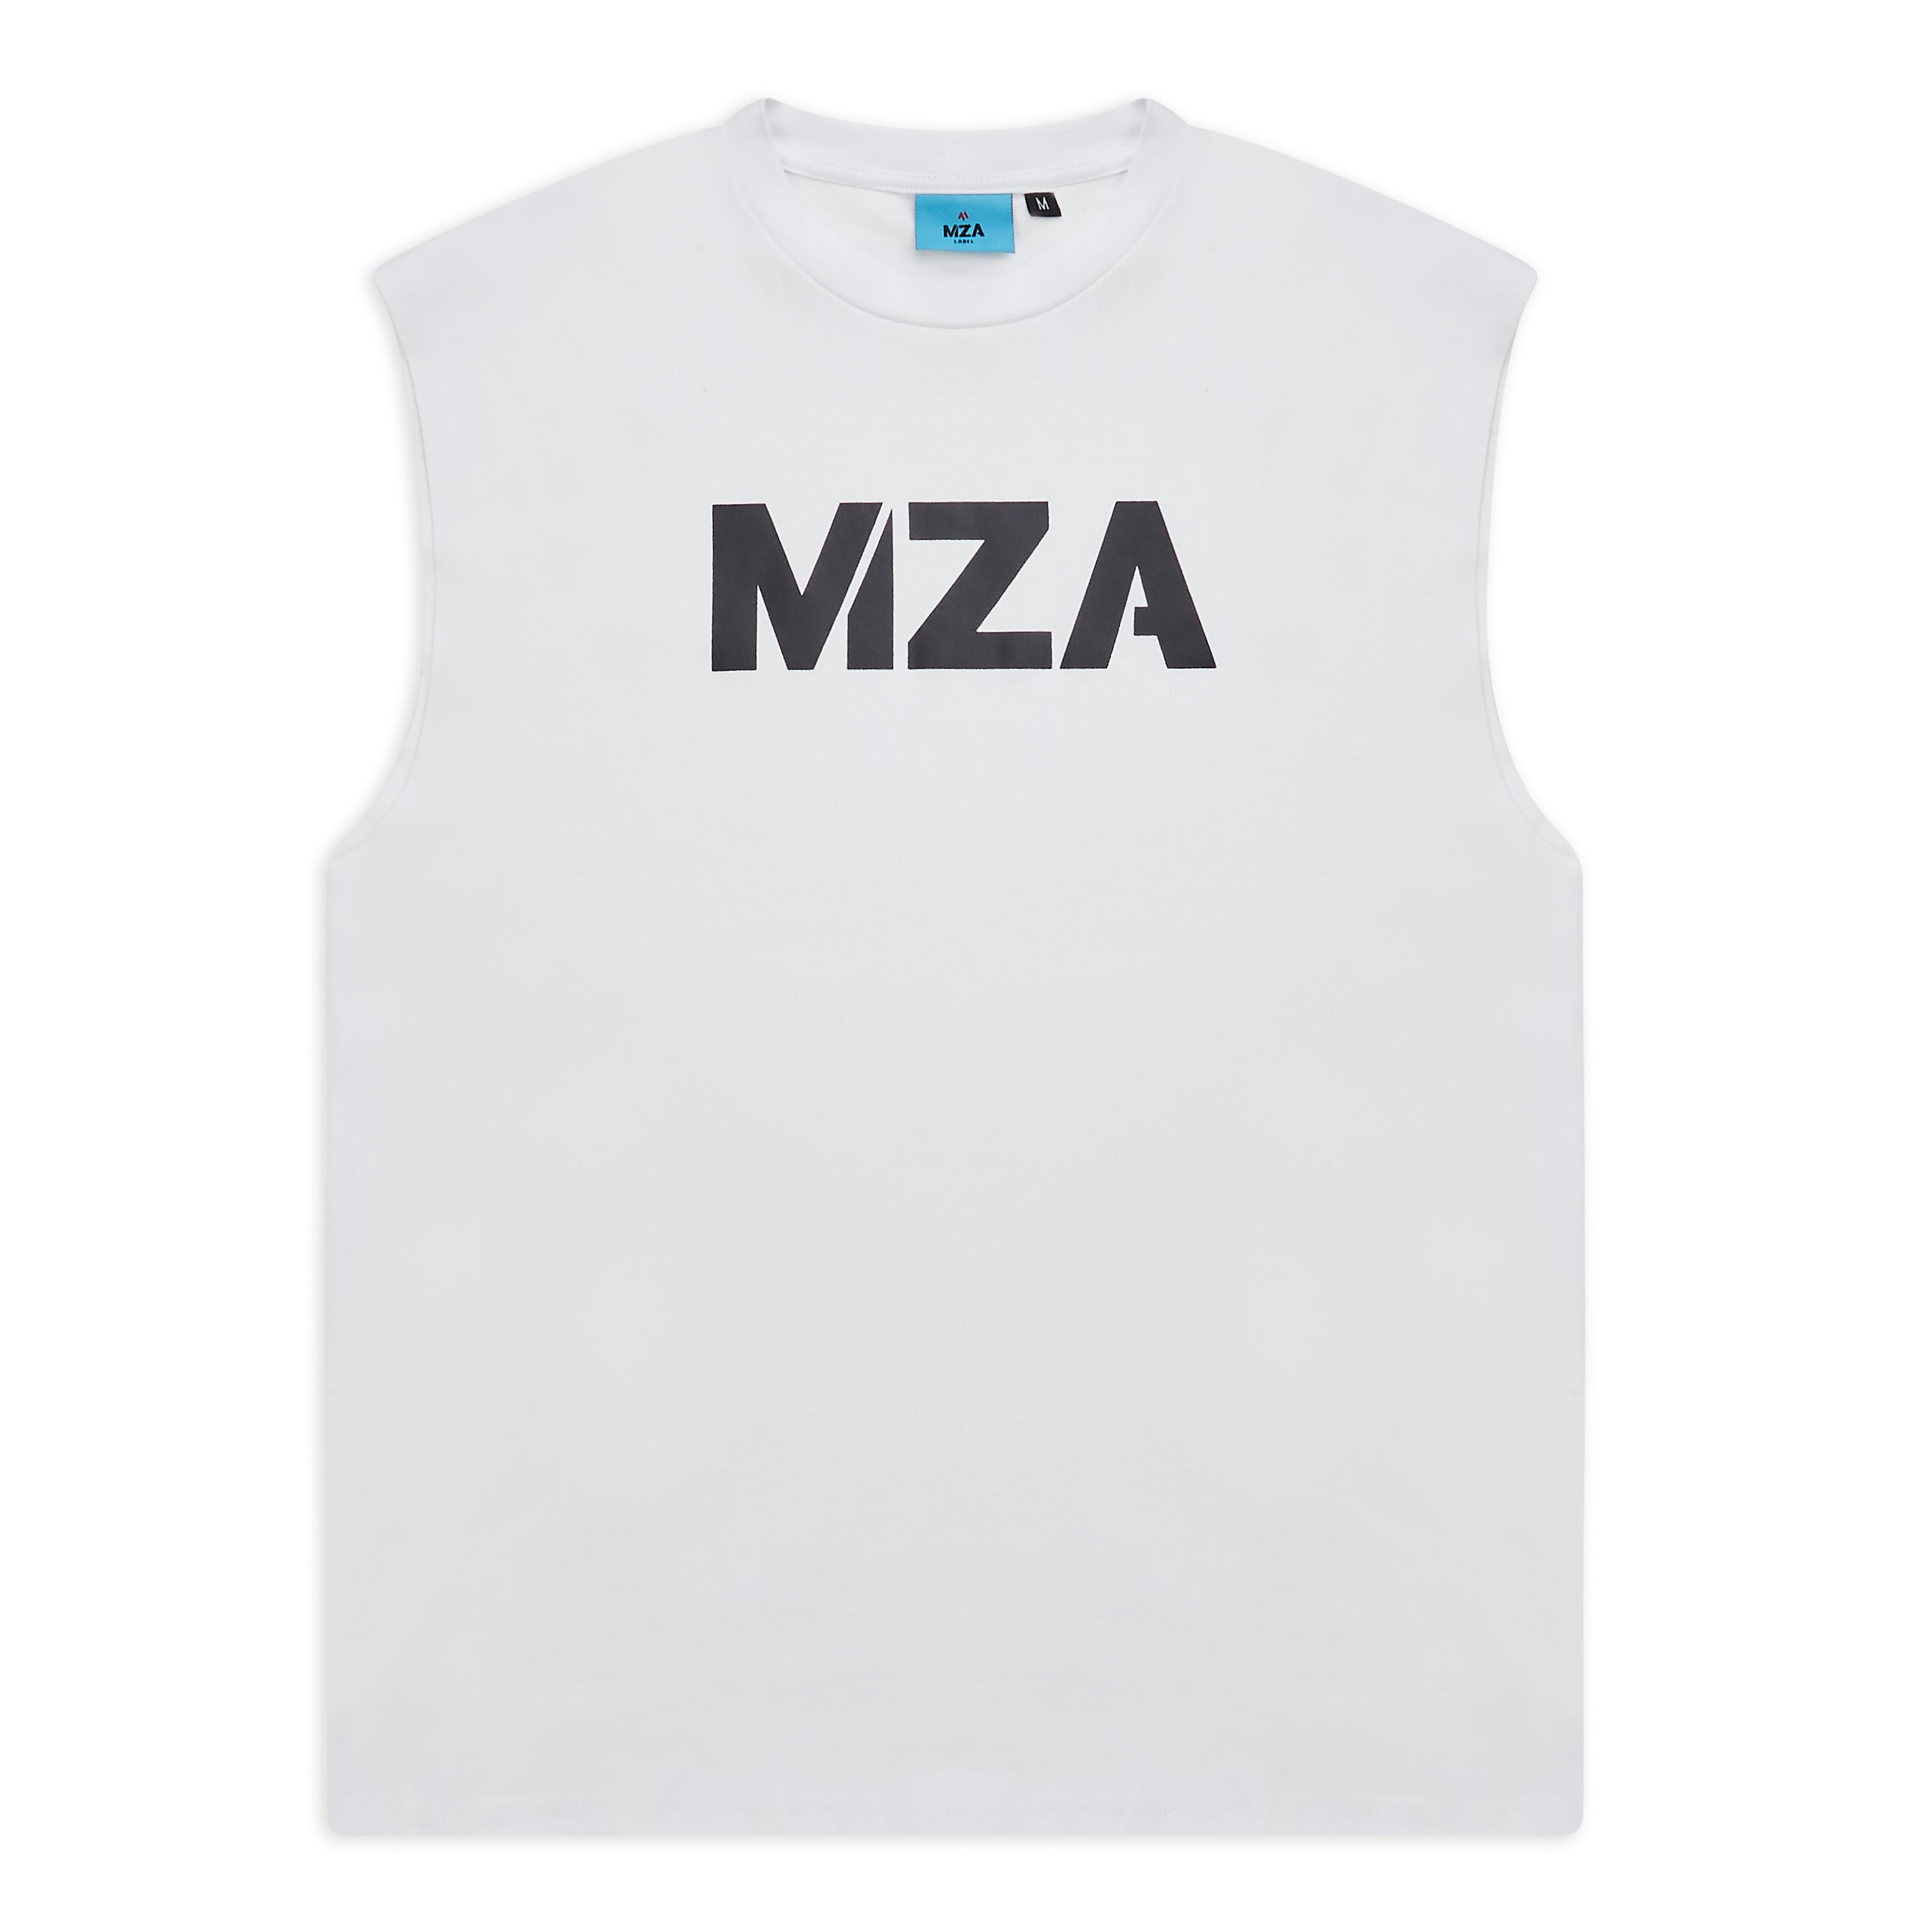 This is a large front product shot of the new standard vest in white, showing off the large front MZA print in black